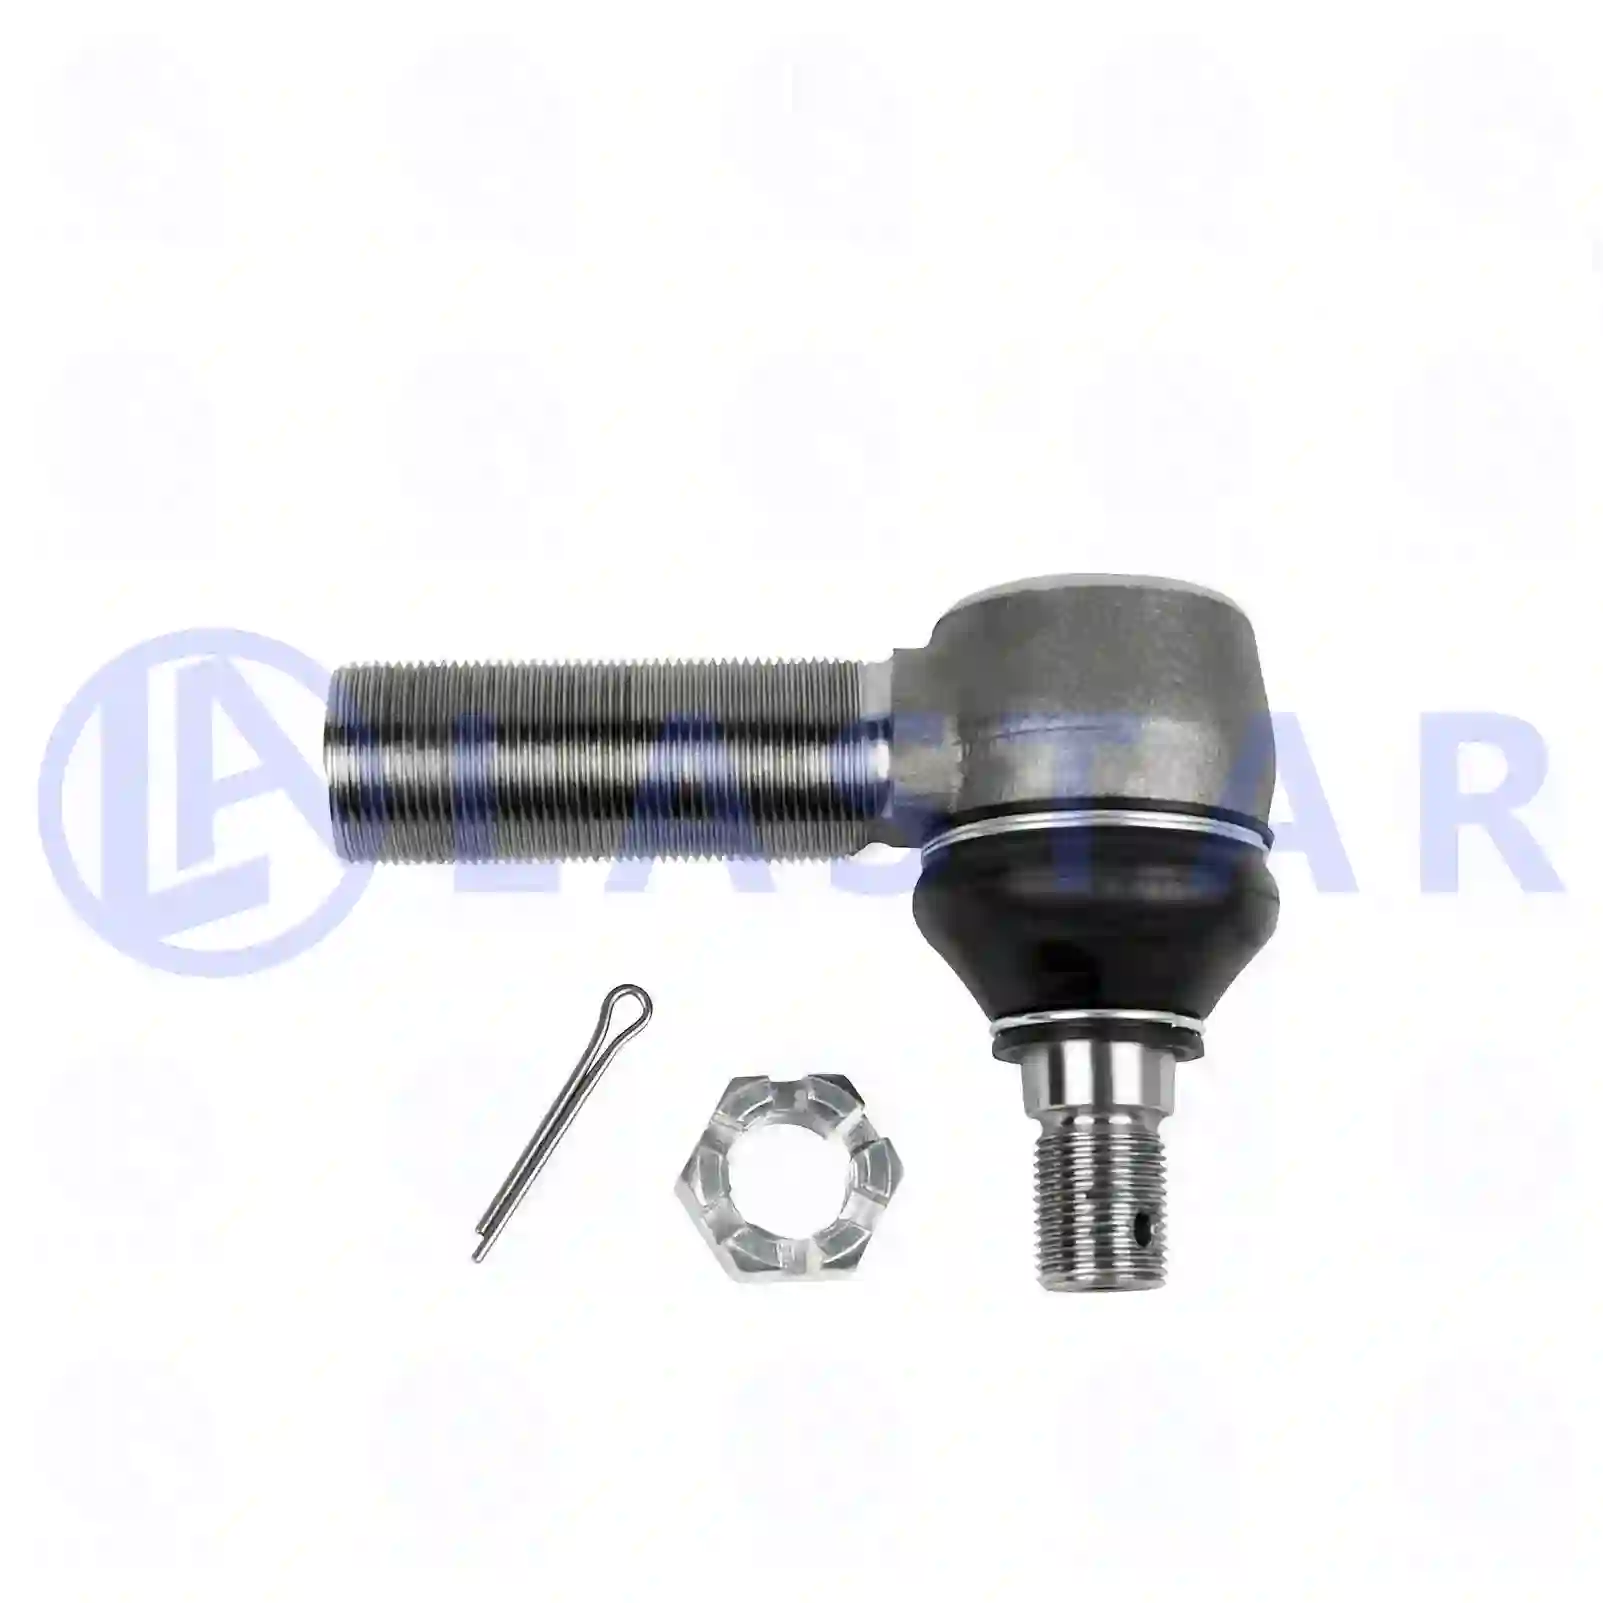 Ball joint, right hand thread, 77705369, 0100197, 0110197, 0607451, 0607453, 100197, 110197, 1228114, 1326864, 1373135, 607451, 607453, ACU9242, 387025960151, 004833825, 02966321, 02966635, 04833825, 04833825, 08193645, 08558533, 08582322, 2966321, 2966635, 42484886, 4833825, 4833825, 8193645, 8558533, 8582322, 81400004051, 81953016060, 81953016135, 81953016140, 81953016249, 81953016298, 81953016316, 81953016328, 81953016358, 0003301435, 0003301535, 0003307135, 0003309335, 0003309535, 0003382129, 0003383629, 0023301135, 3443307135, 120325701, 0003406242, 5000823987, 5001825687, 1517440, 1517444, 1698191, ZG40390-0008 ||  77705369 Lastar Spare Part | Truck Spare Parts, Auotomotive Spare Parts Ball joint, right hand thread, 77705369, 0100197, 0110197, 0607451, 0607453, 100197, 110197, 1228114, 1326864, 1373135, 607451, 607453, ACU9242, 387025960151, 004833825, 02966321, 02966635, 04833825, 04833825, 08193645, 08558533, 08582322, 2966321, 2966635, 42484886, 4833825, 4833825, 8193645, 8558533, 8582322, 81400004051, 81953016060, 81953016135, 81953016140, 81953016249, 81953016298, 81953016316, 81953016328, 81953016358, 0003301435, 0003301535, 0003307135, 0003309335, 0003309535, 0003382129, 0003383629, 0023301135, 3443307135, 120325701, 0003406242, 5000823987, 5001825687, 1517440, 1517444, 1698191, ZG40390-0008 ||  77705369 Lastar Spare Part | Truck Spare Parts, Auotomotive Spare Parts